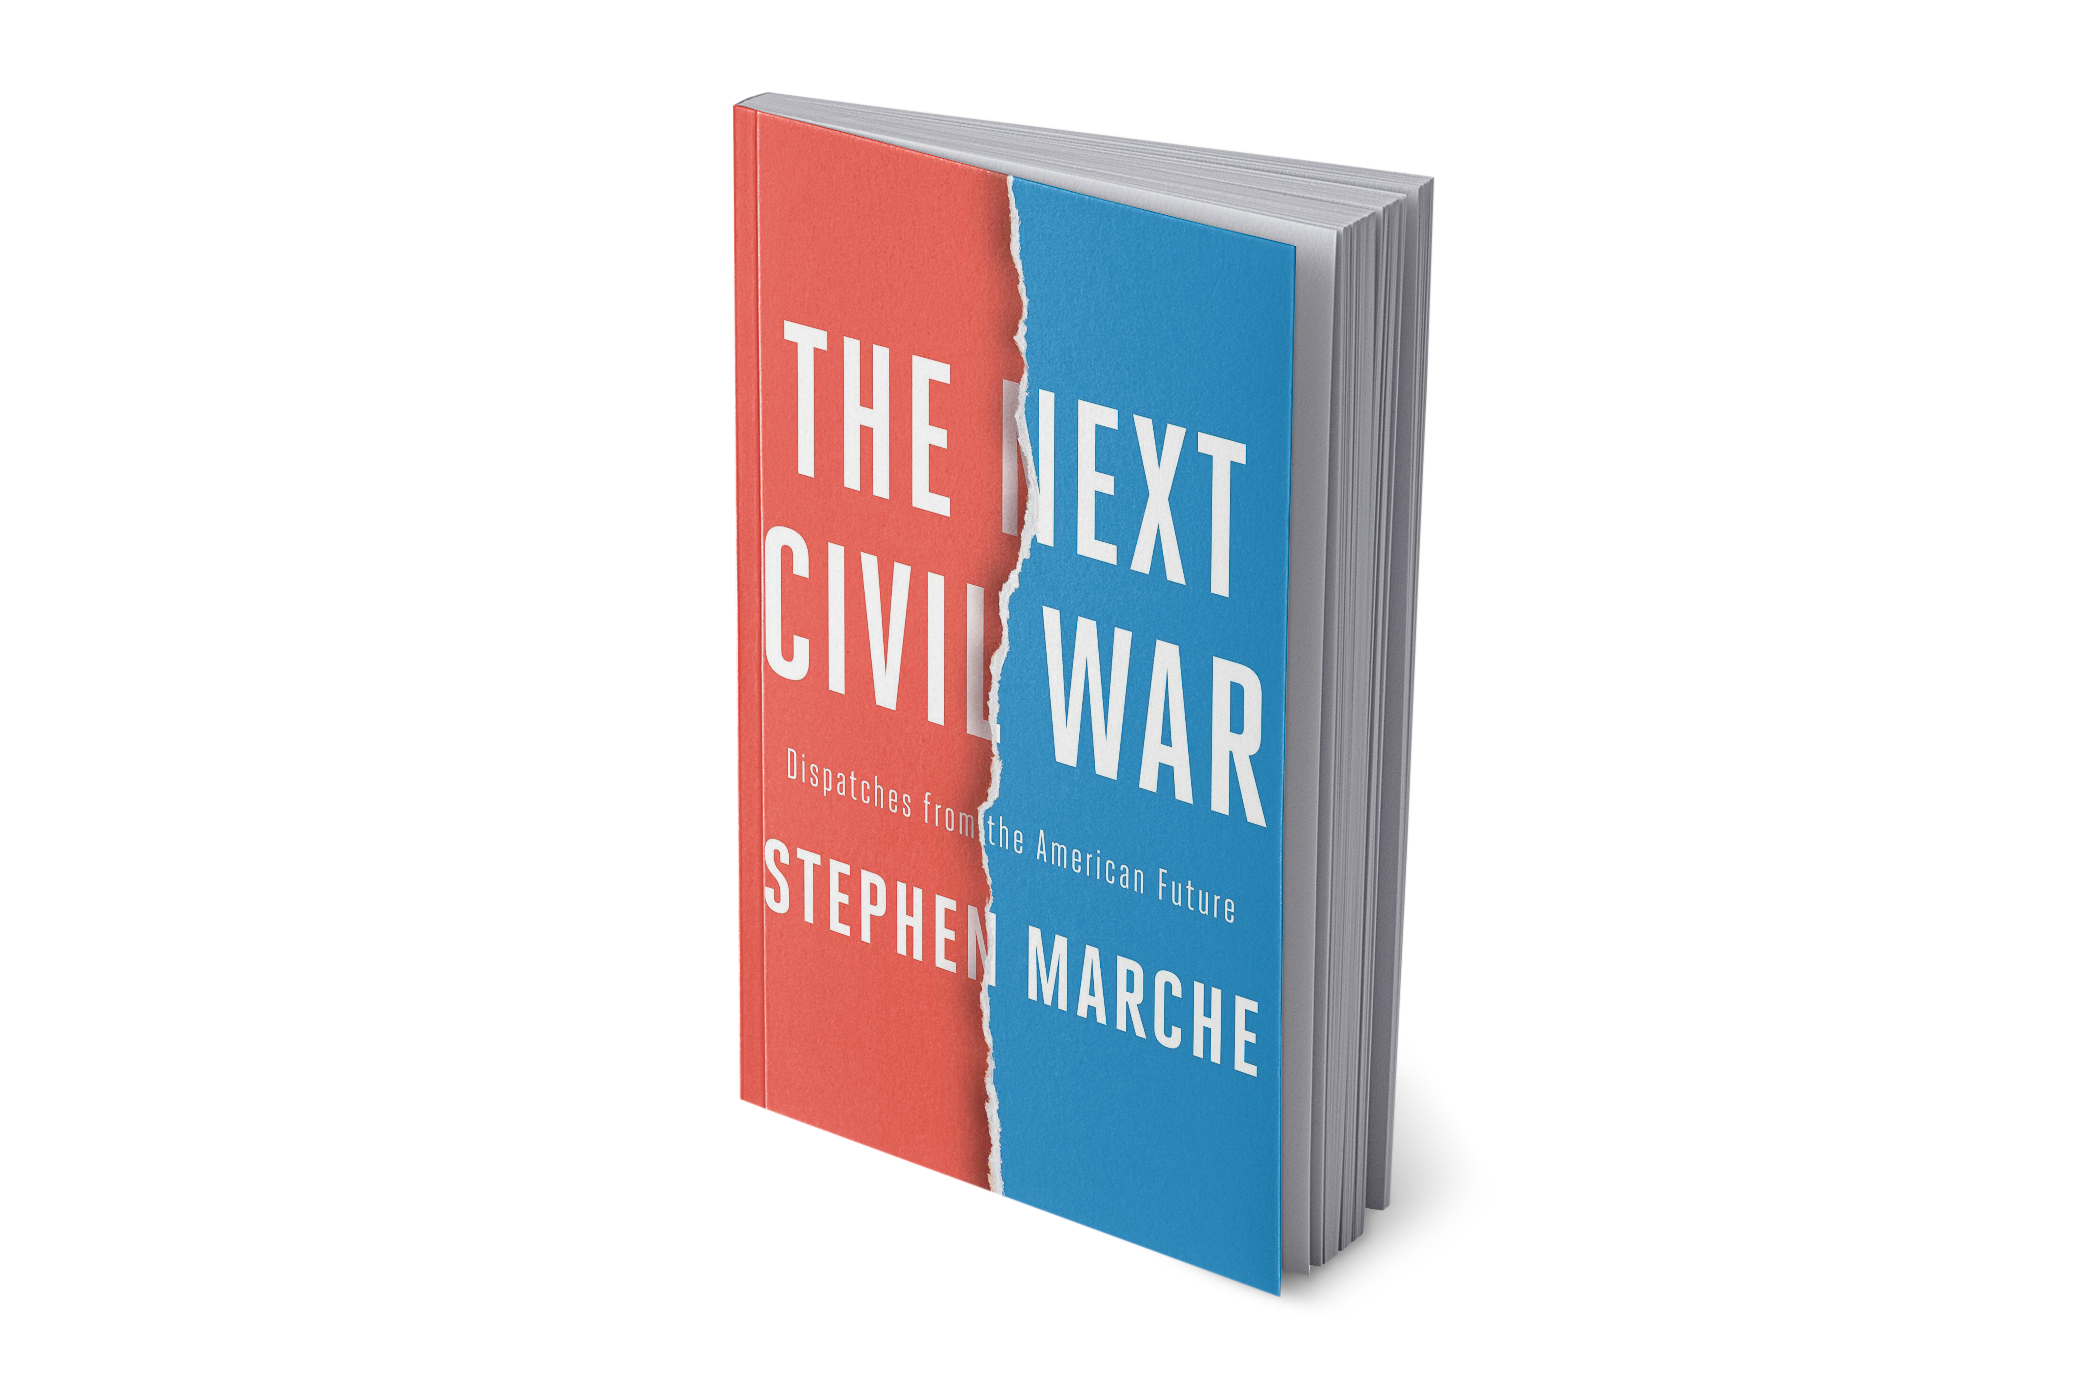 Stephen Marche's 'The Next Civil War' imagine what the fall of the United States would be like. 